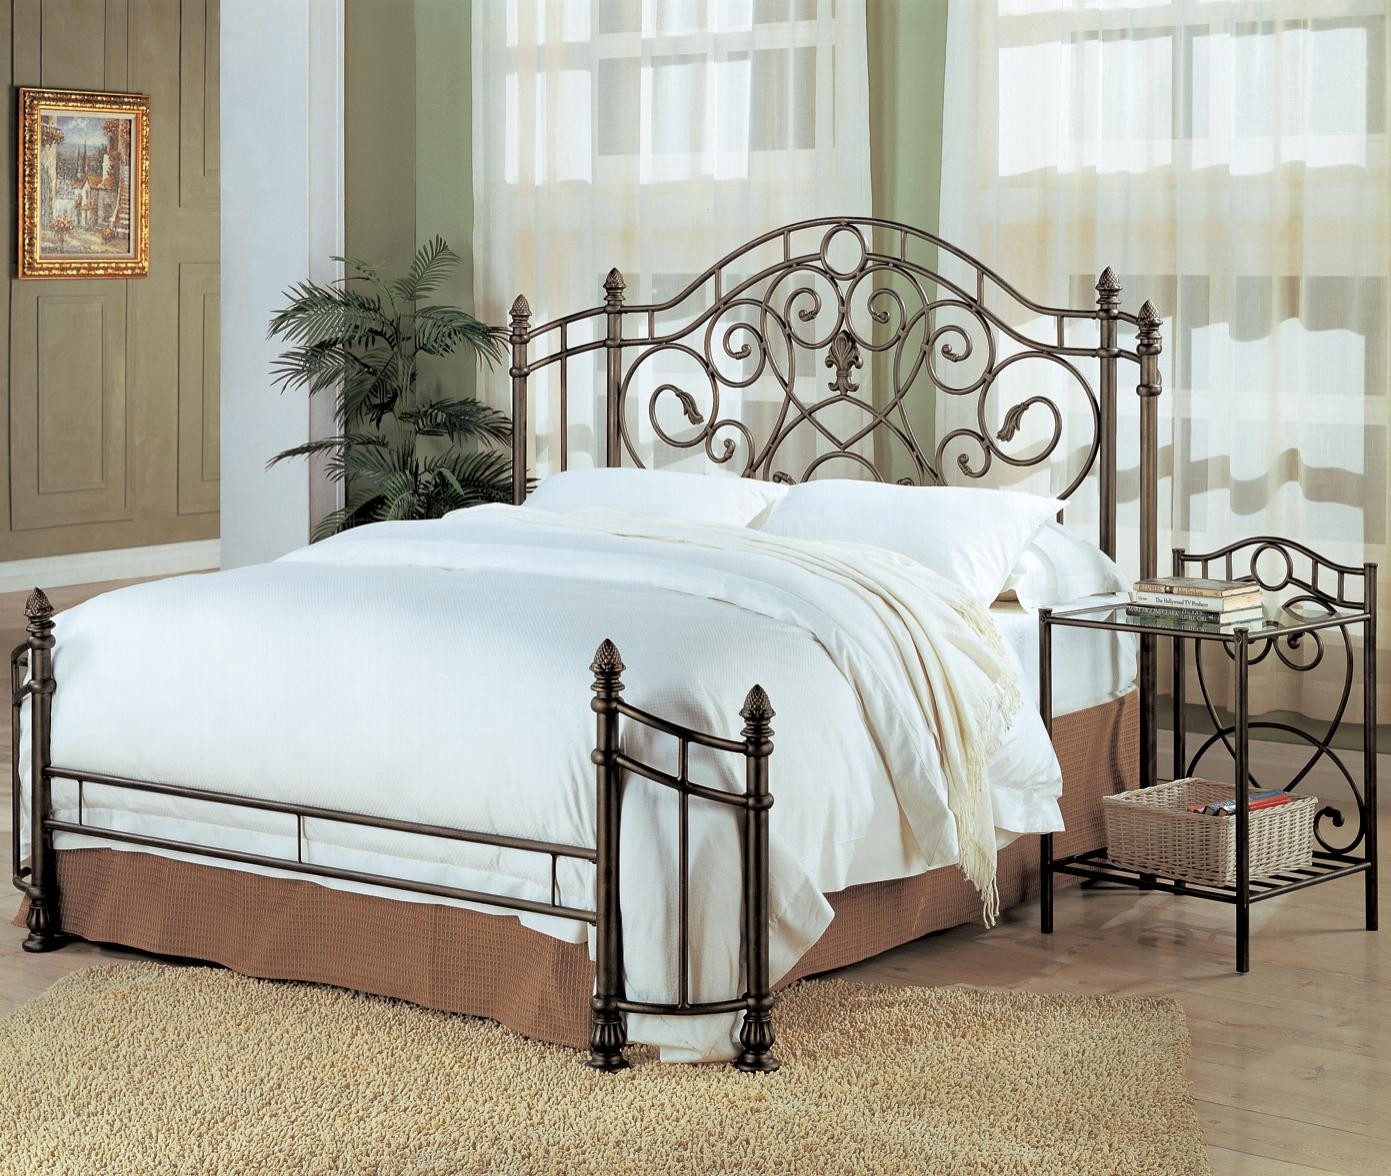 Wrought iron sleigh bed